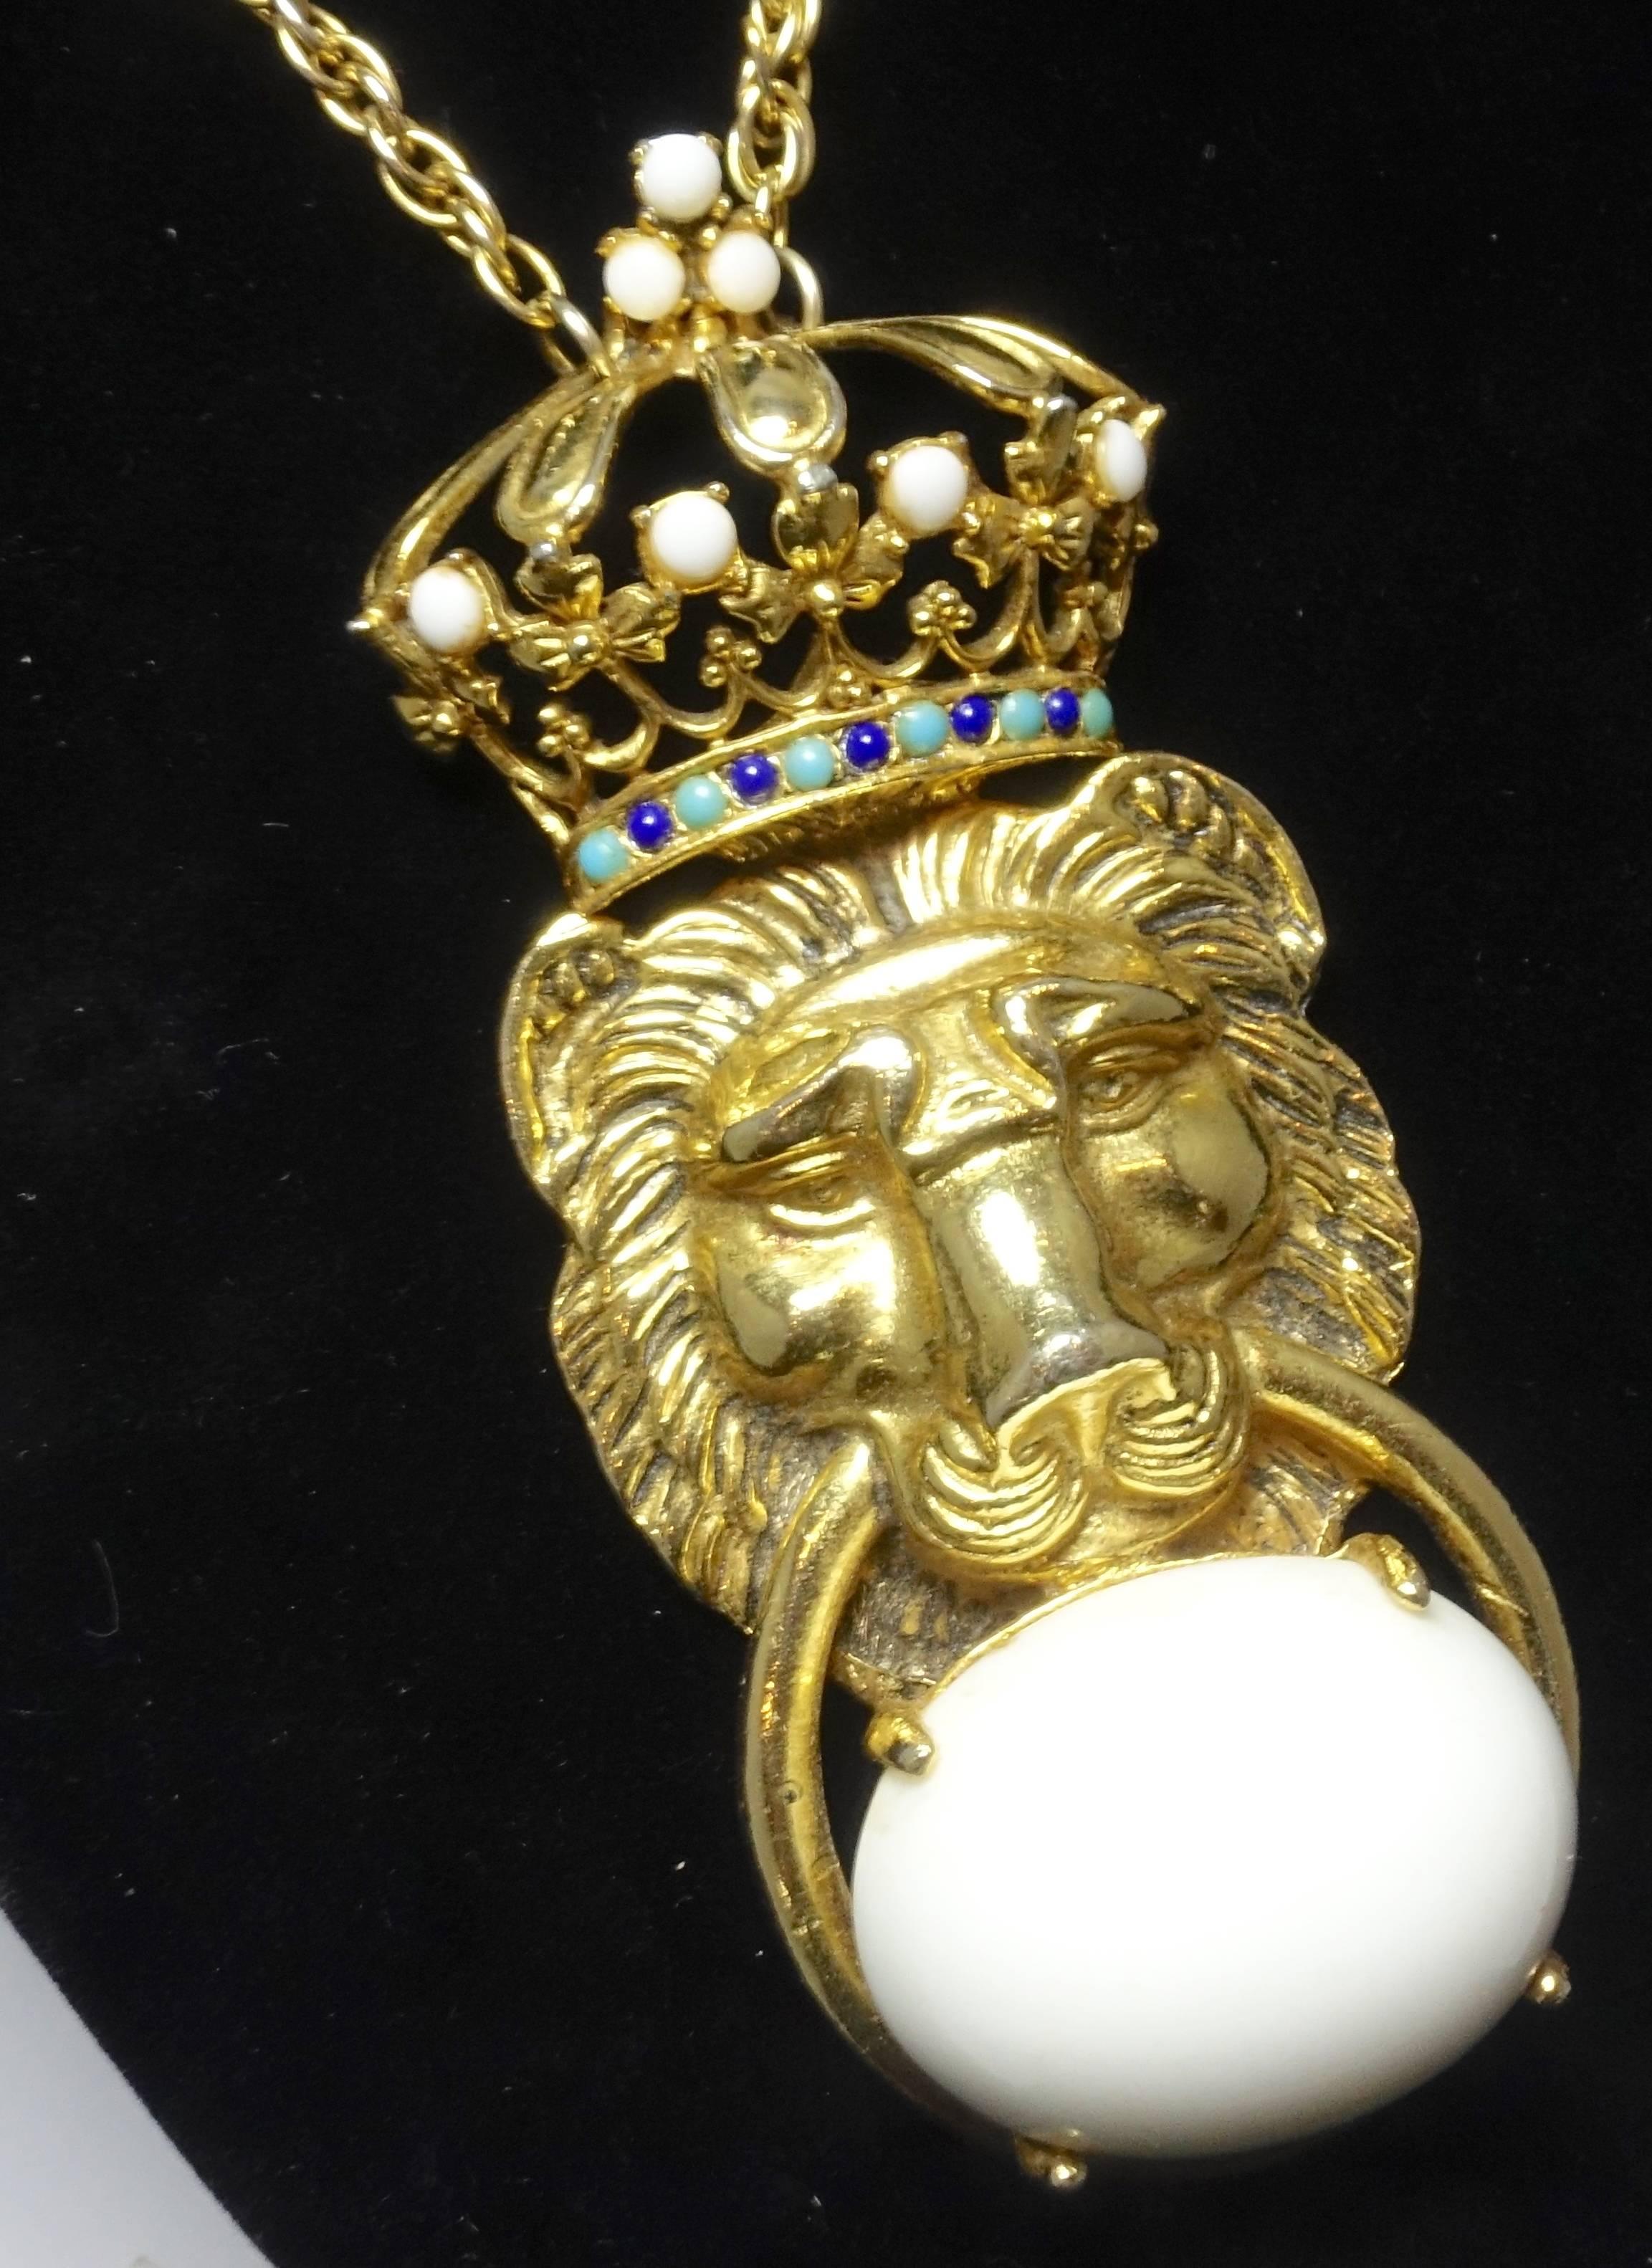 This lion necklace by Pauline Rader lets you know he is the king of the jungle and why she is so collectible today.  He has a crown on top of his head with accents of faux turquoise and faux sapphire beads.  The crown has 3 white beads on top and